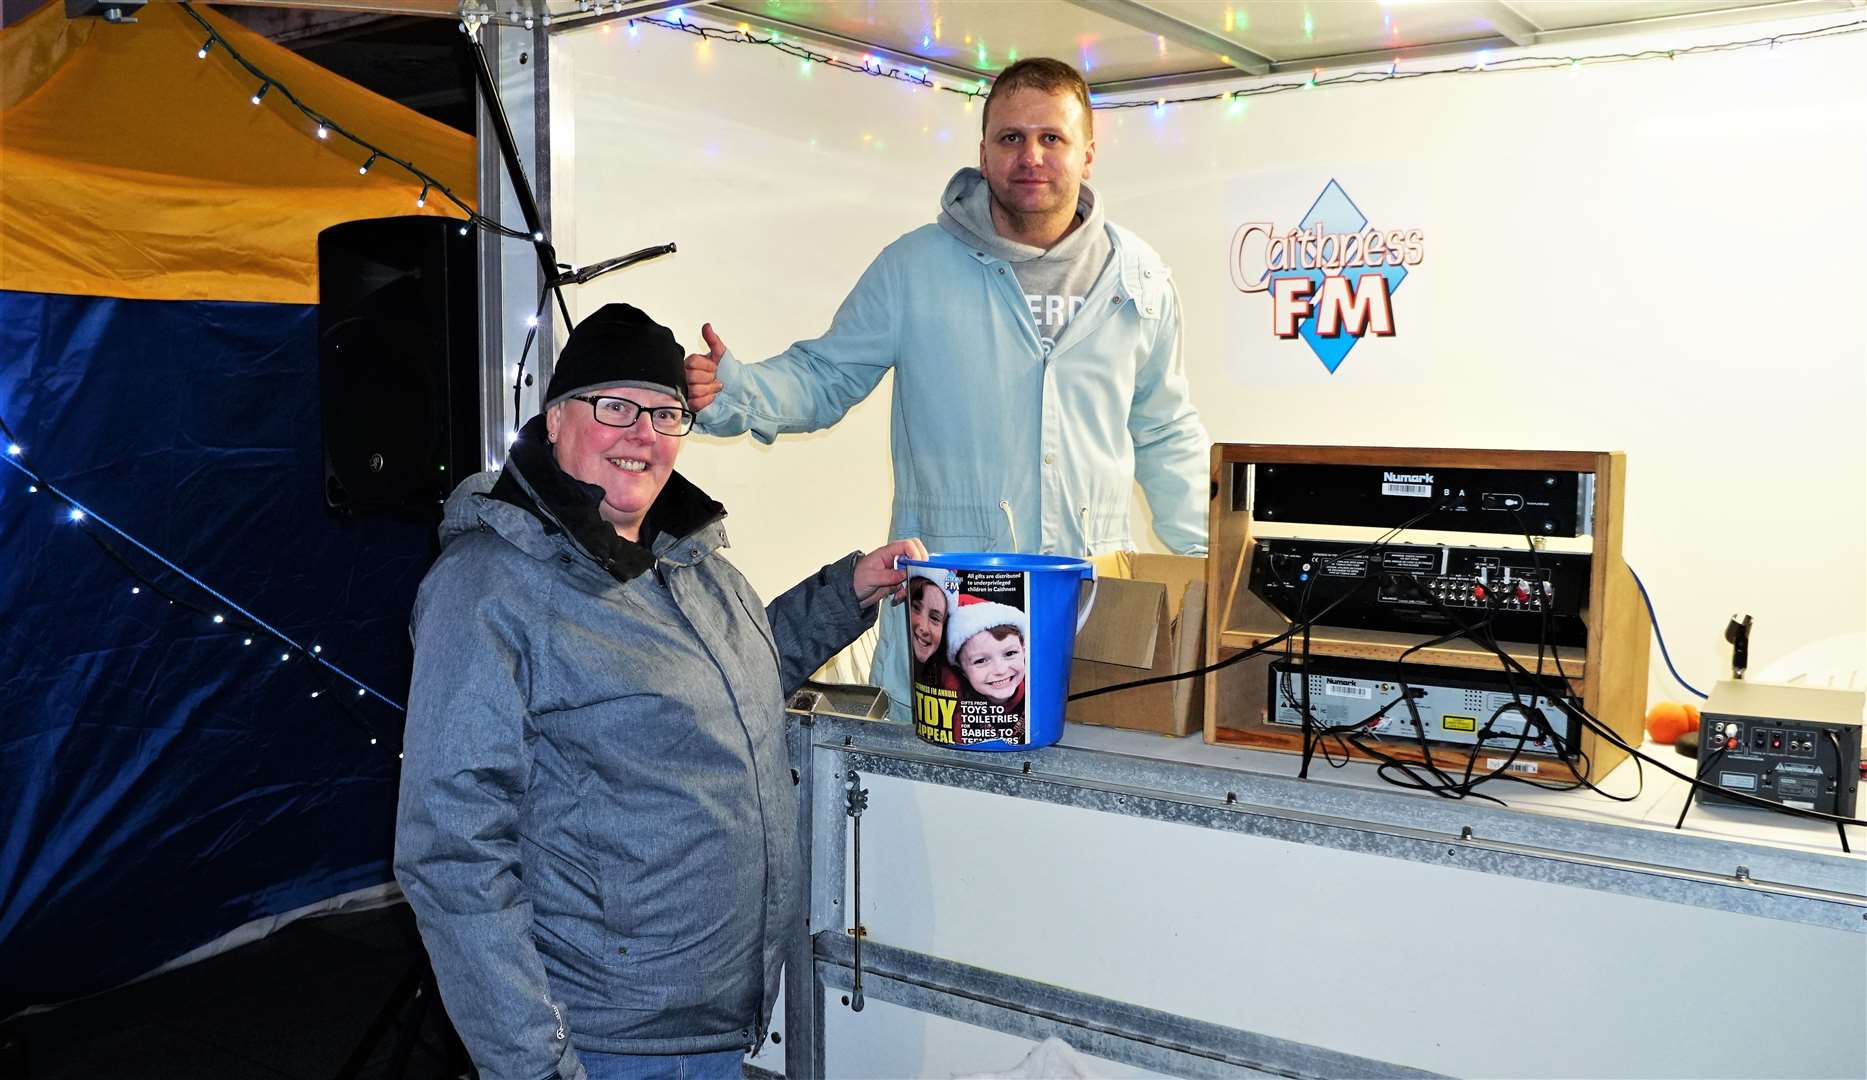 Caithness FM provided the festive sounds at the event. Sand Owsnett, left, with Shane Ross. Picture: DGS